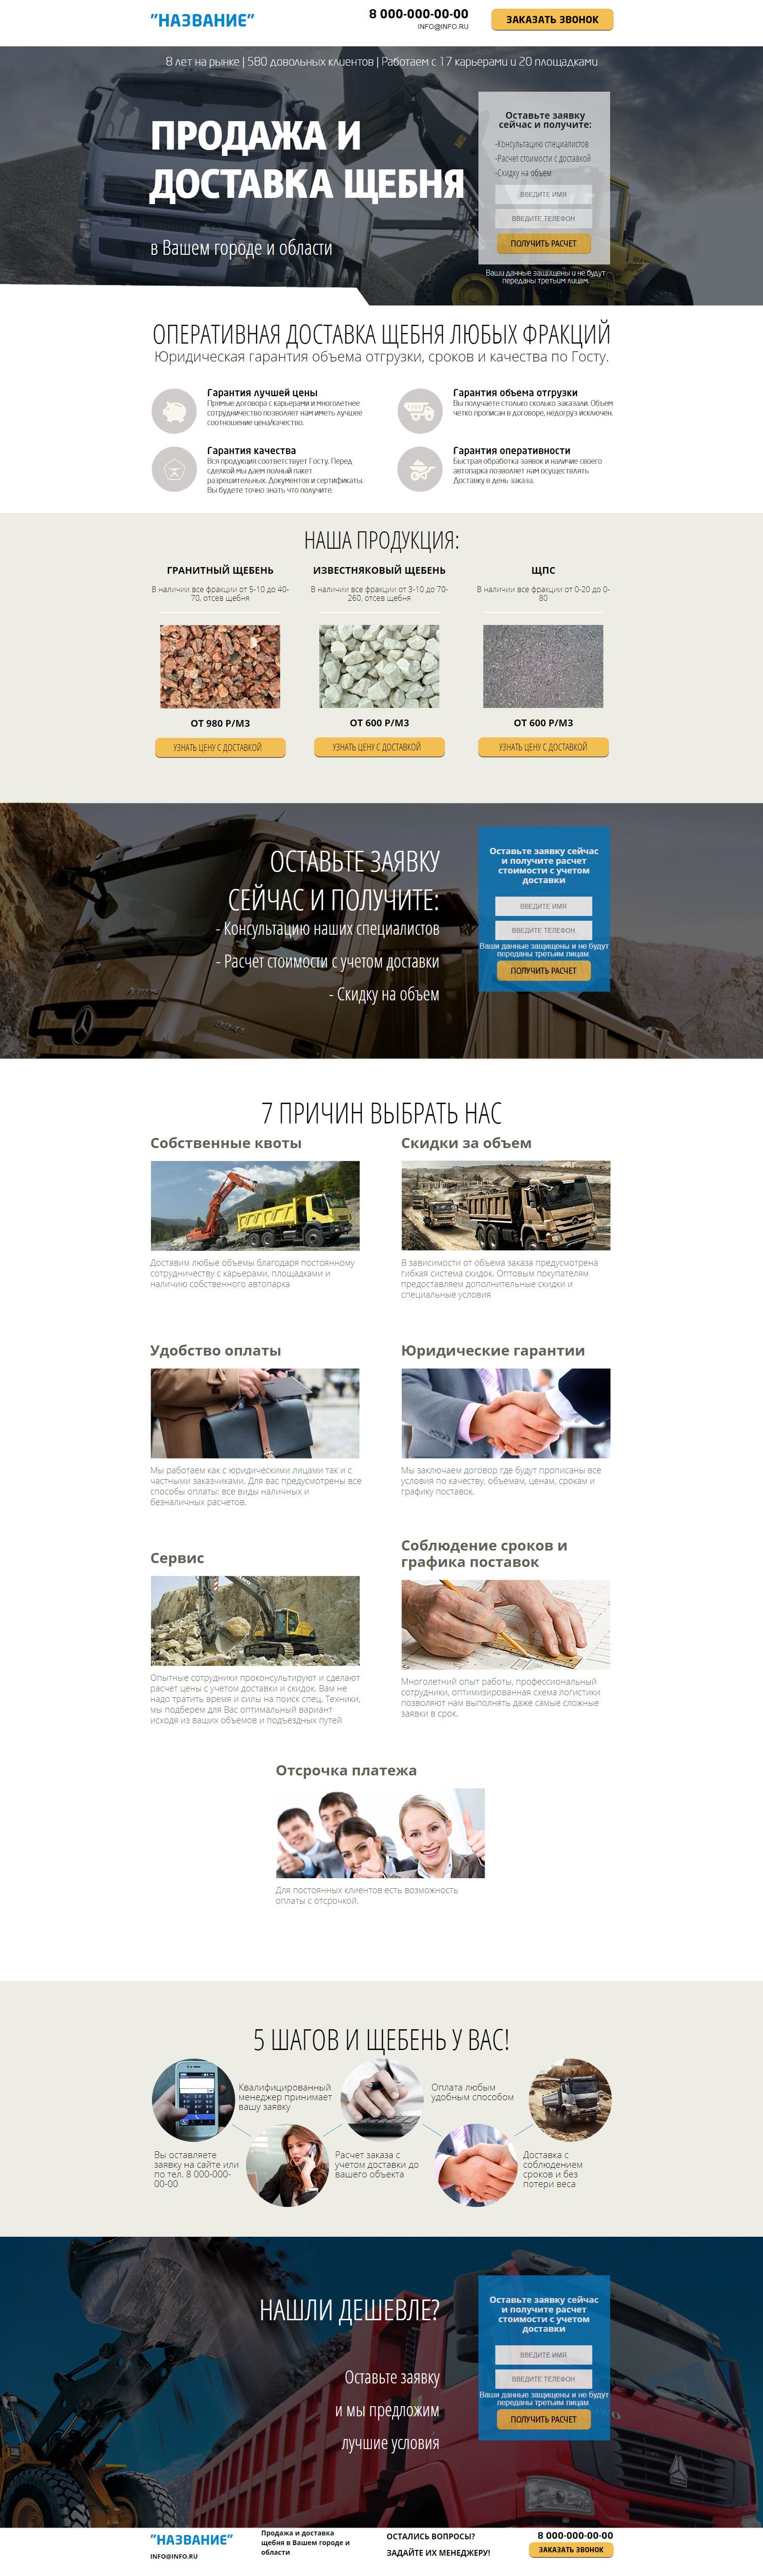 Landing page - Sale of crushed stone and other bulk materials